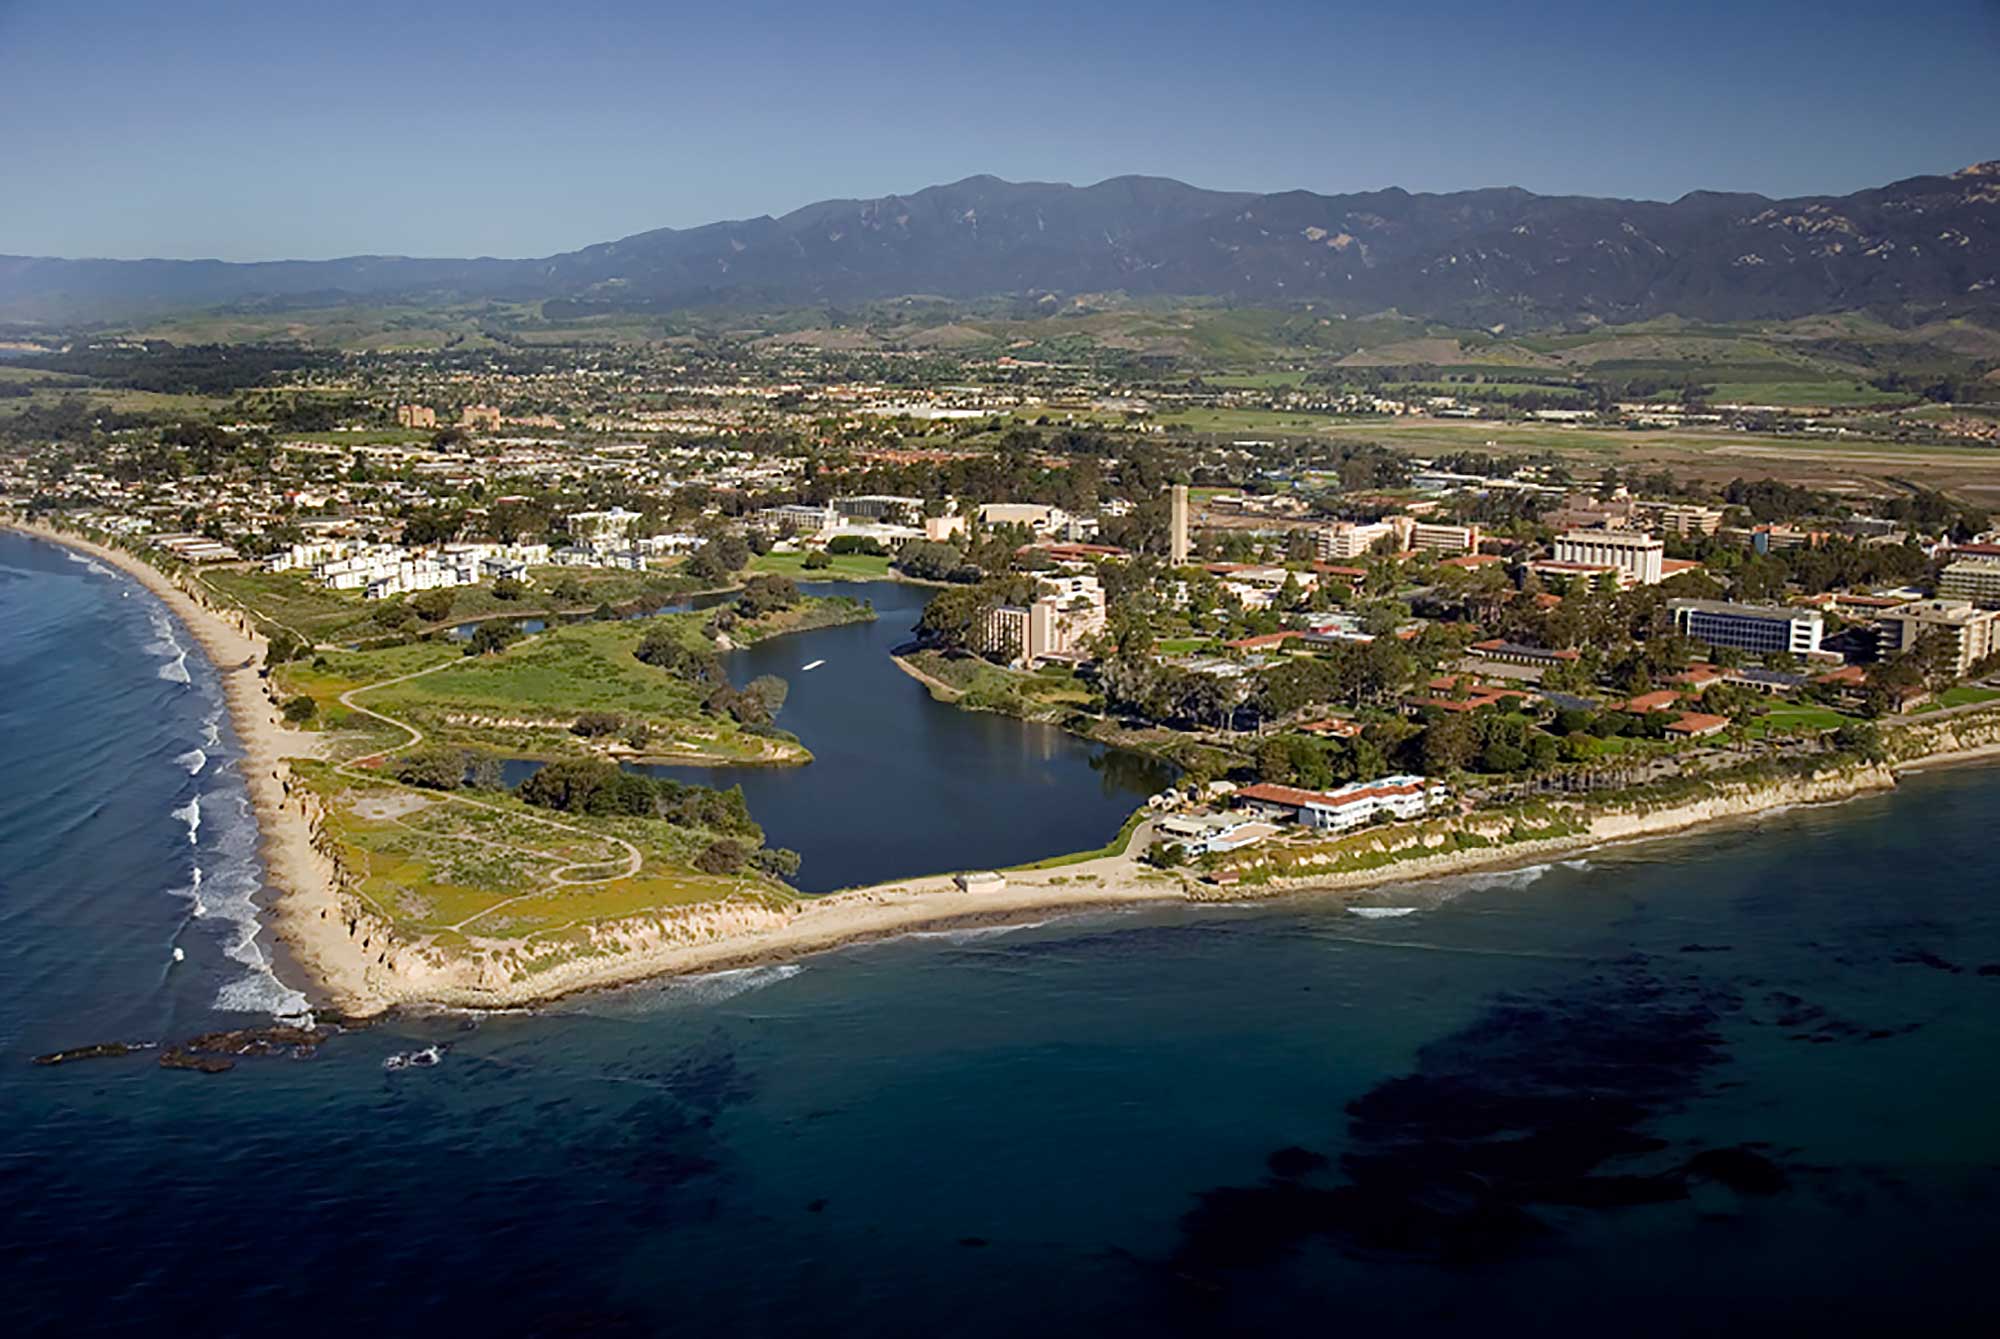 Campus Point. Credit: UCSB Photographic Services